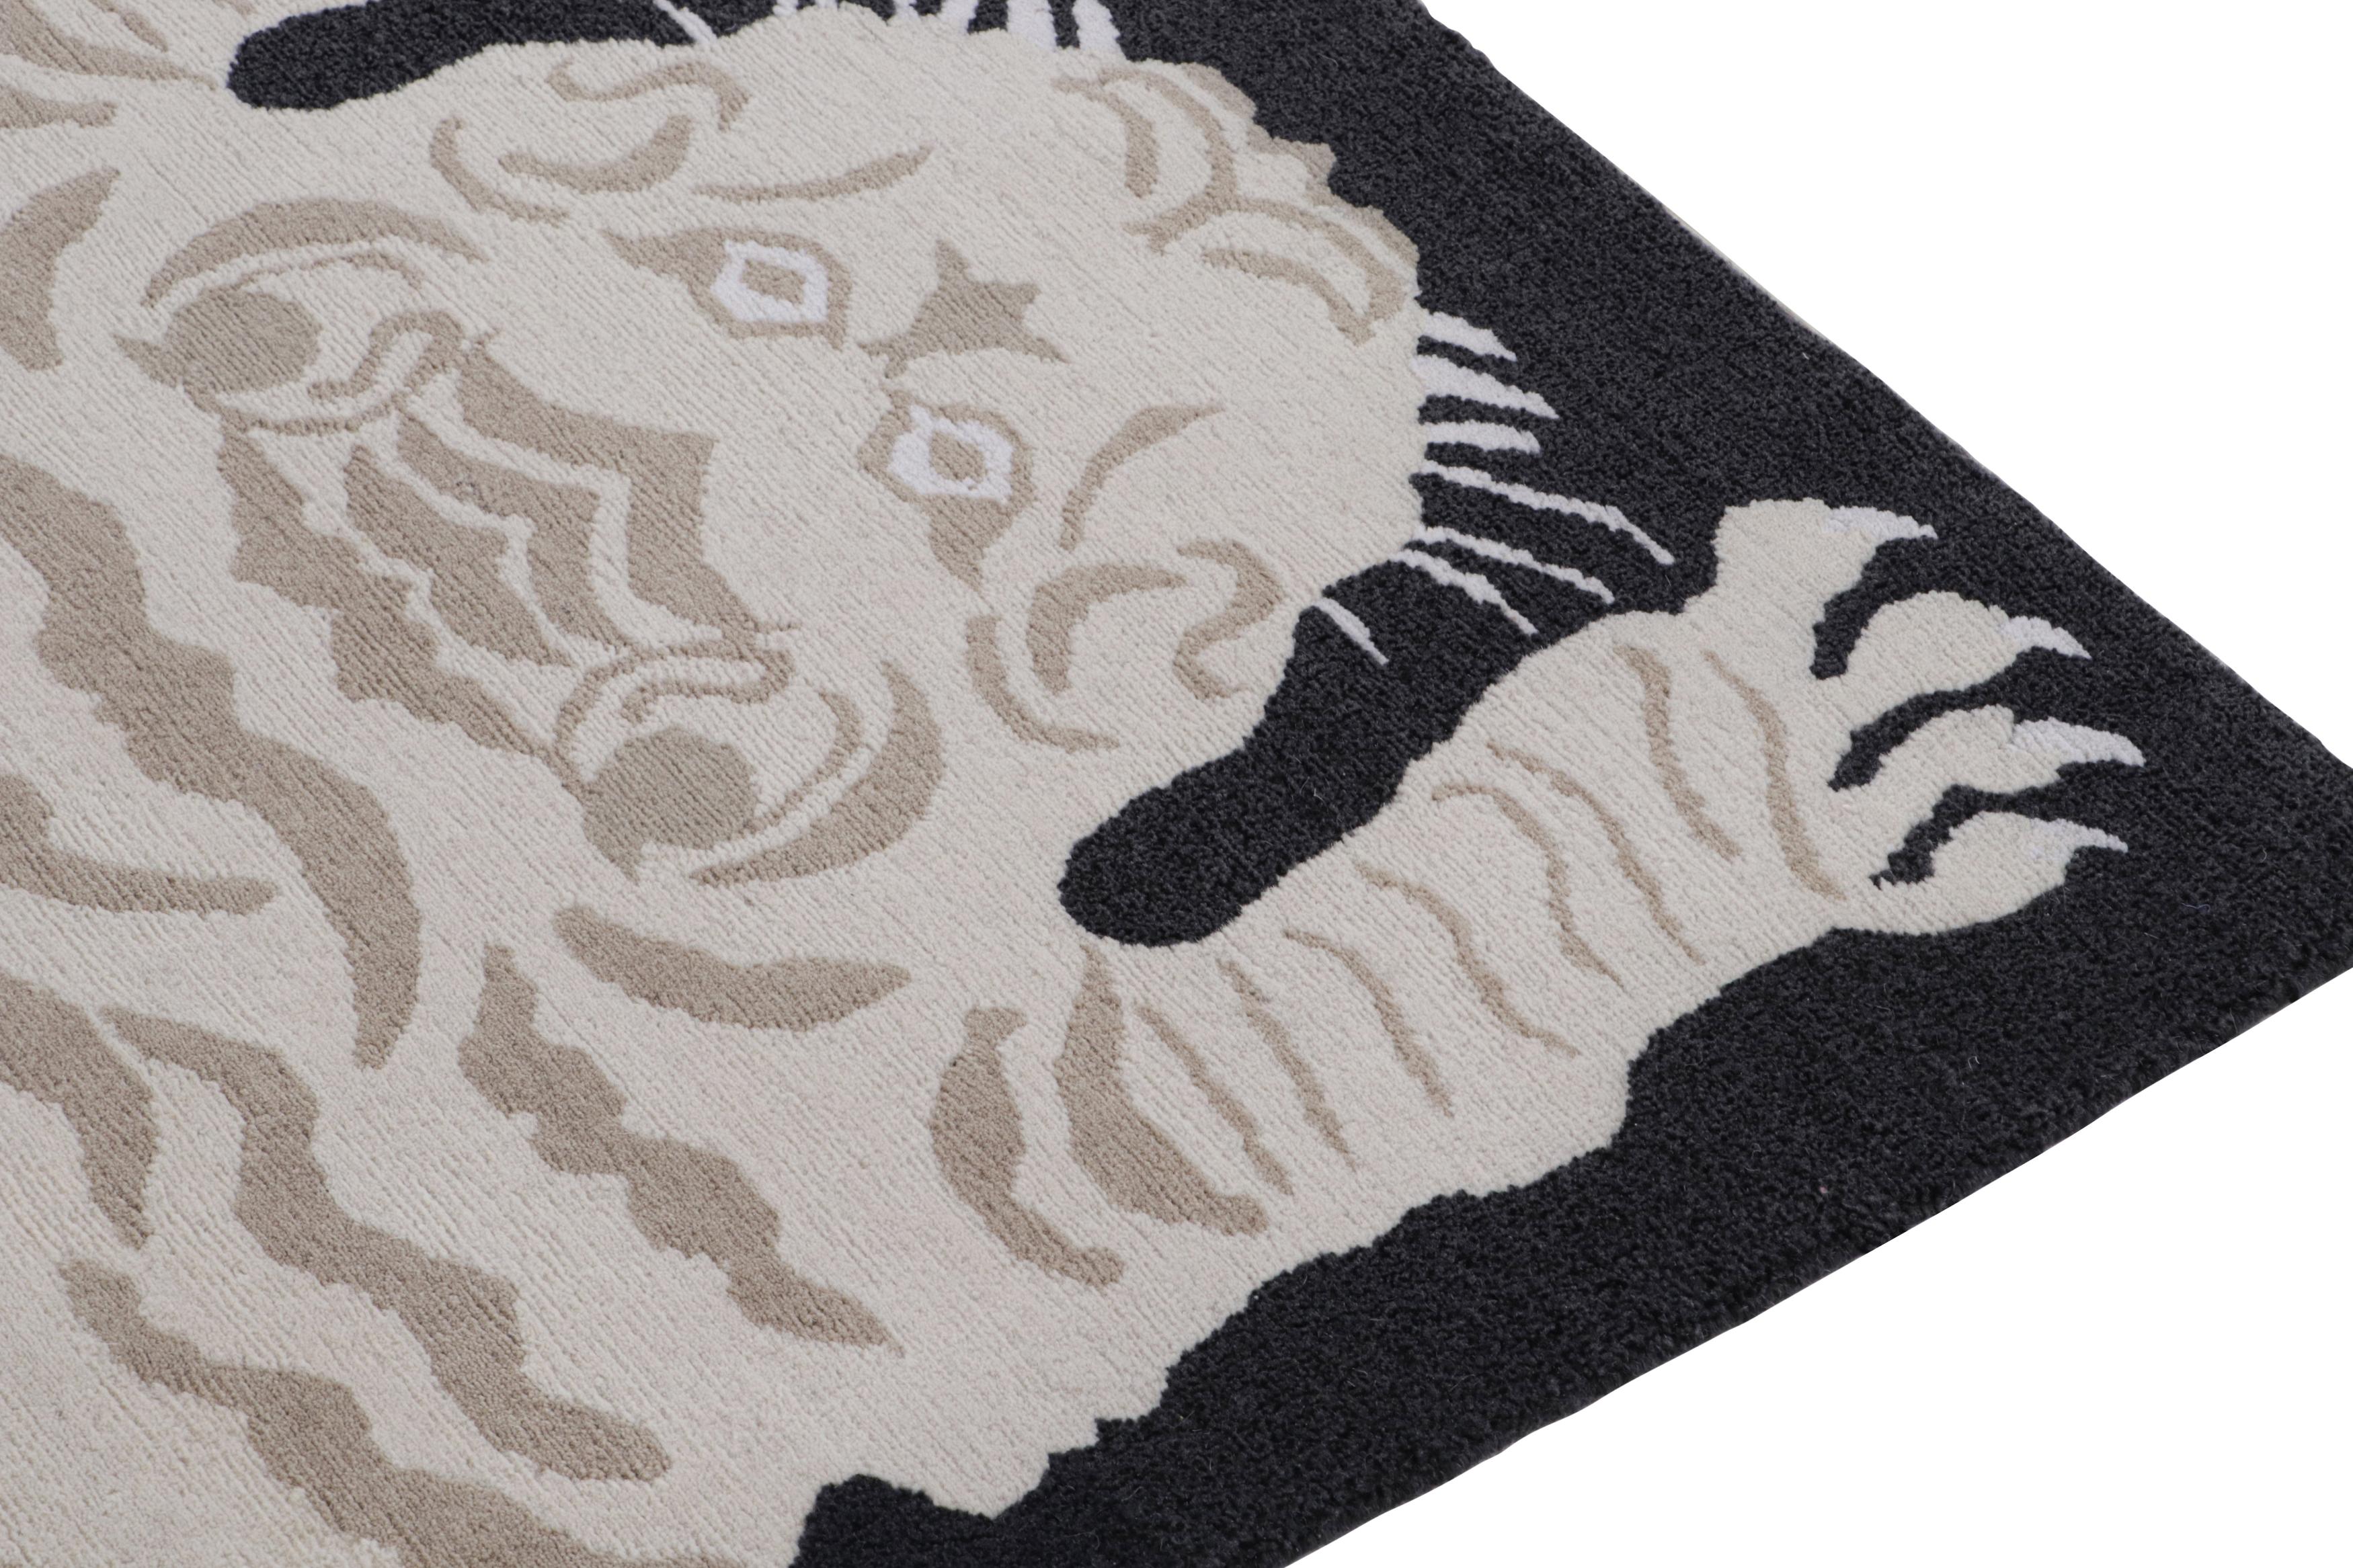 Rug & Kilim’s Tiger-Skin Rug in Black with Cream & Brown Pictorial In New Condition For Sale In Long Island City, NY